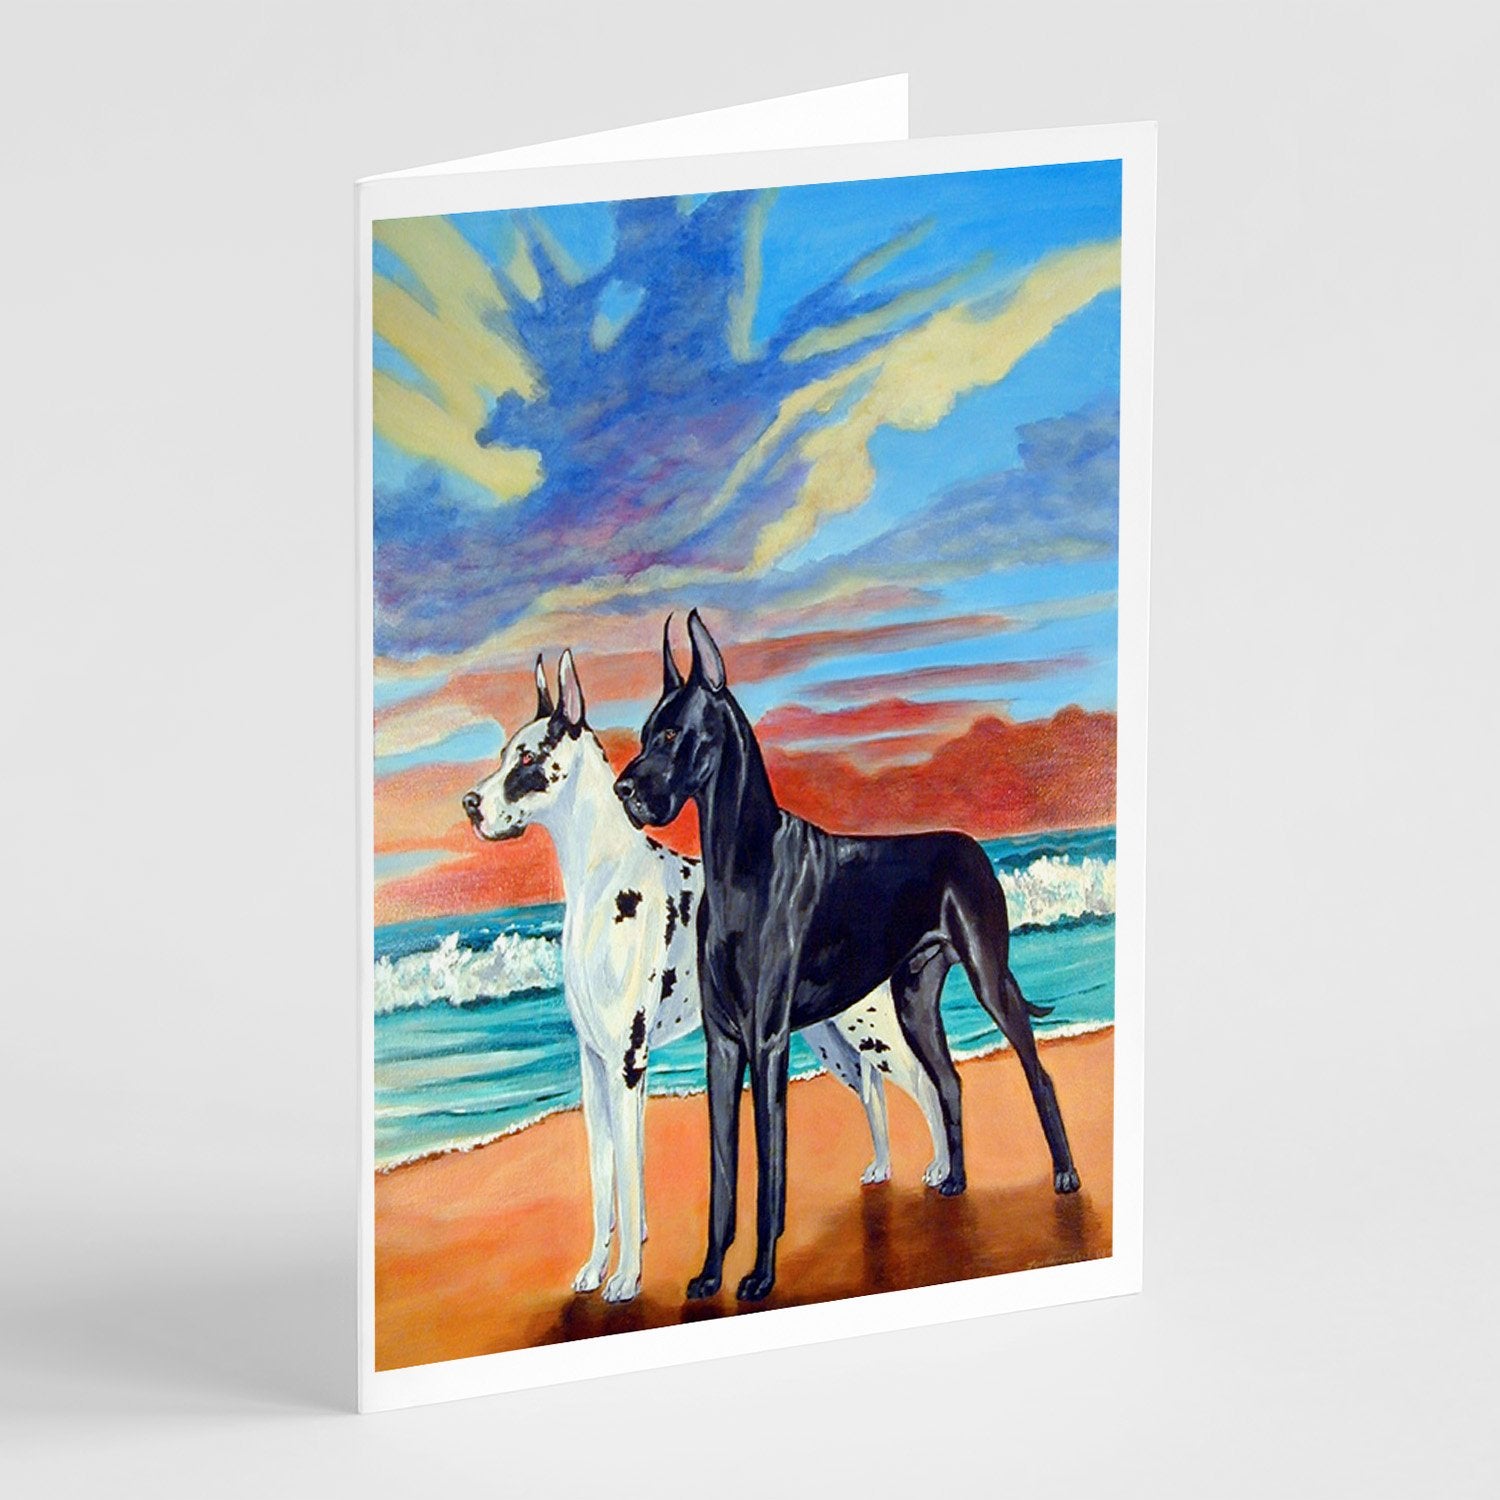 Buy this At sunset Great Dane Harlequin and Black Greeting Cards and Envelopes Pack of 8